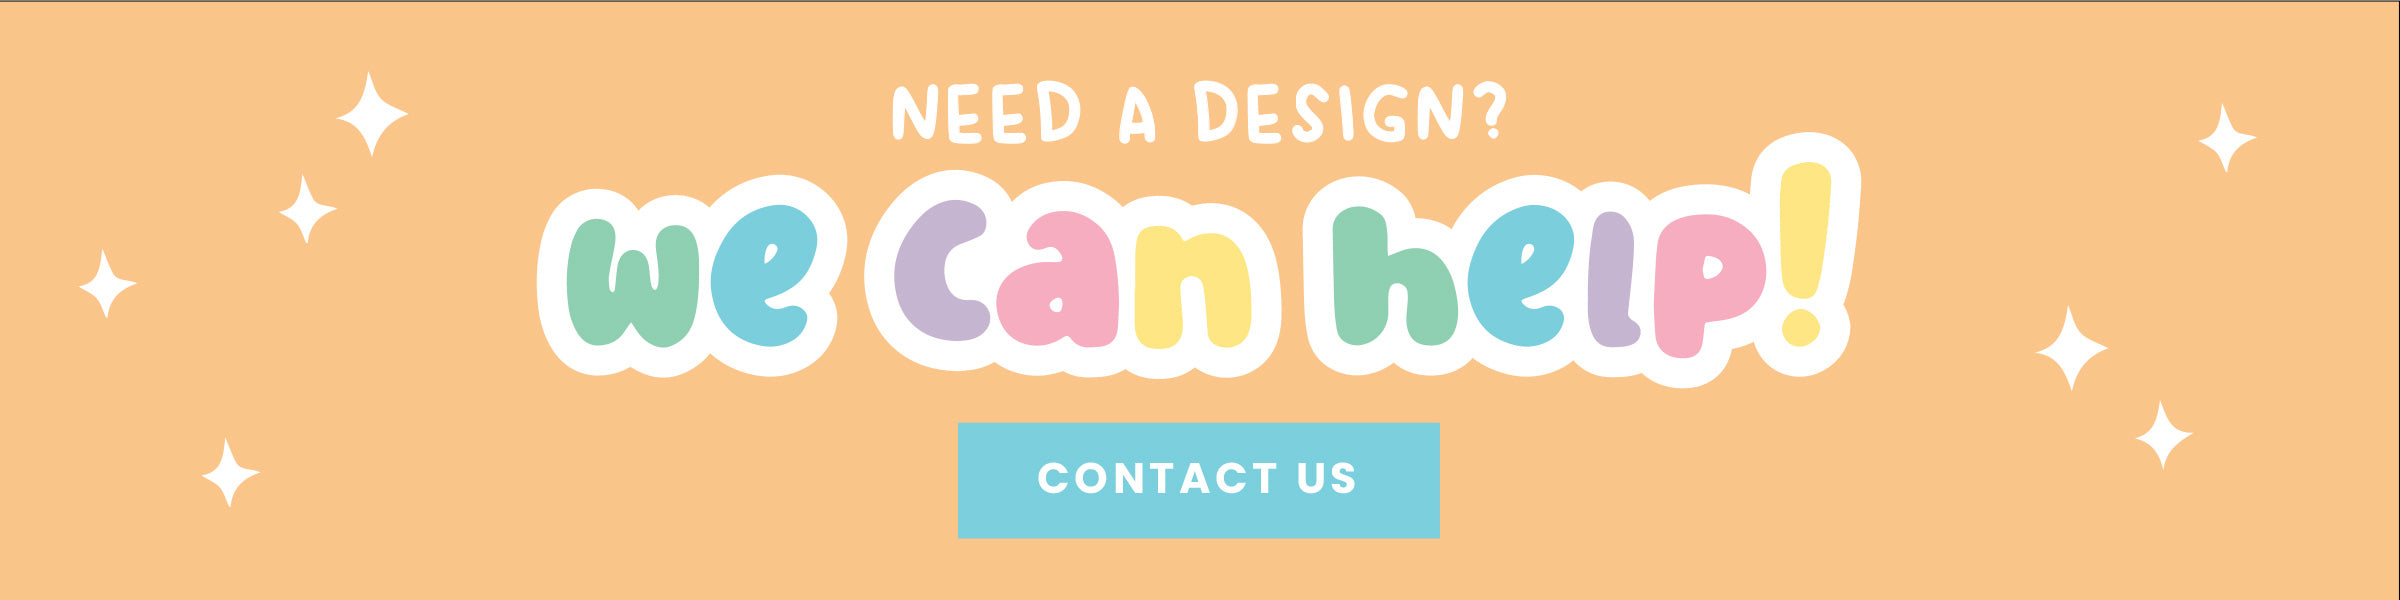 Need a design? We can help!